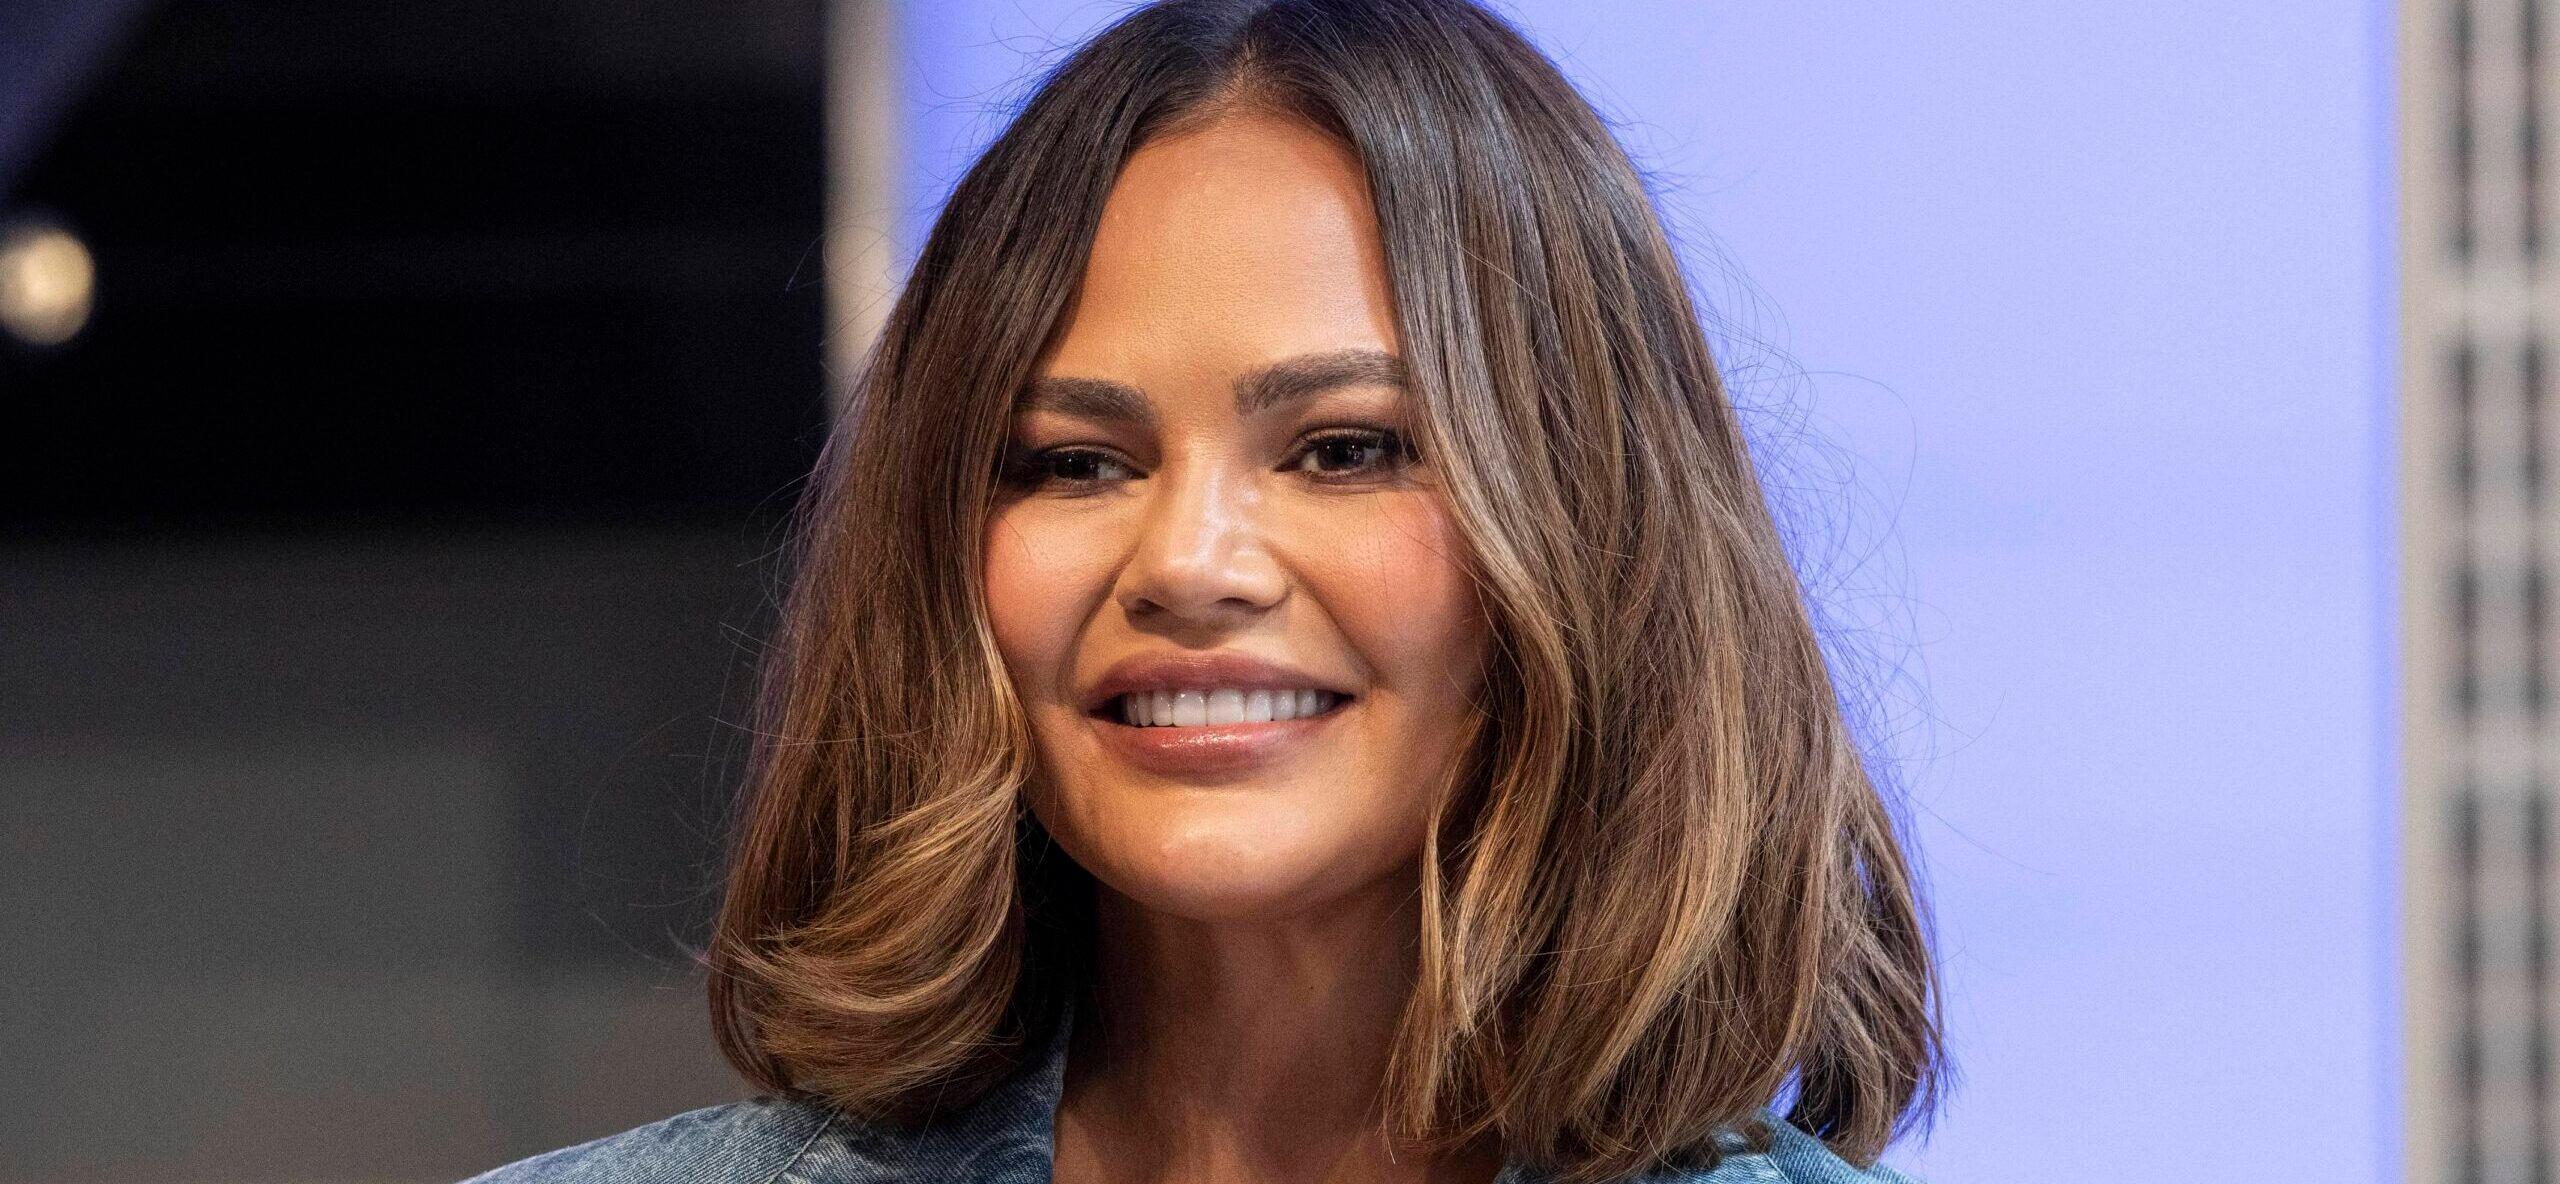 Chrissy Teigen Admits She Will ‘Never Be Perfect’ After Fans Labeled Her As ‘Entitled’ And ‘Rude’